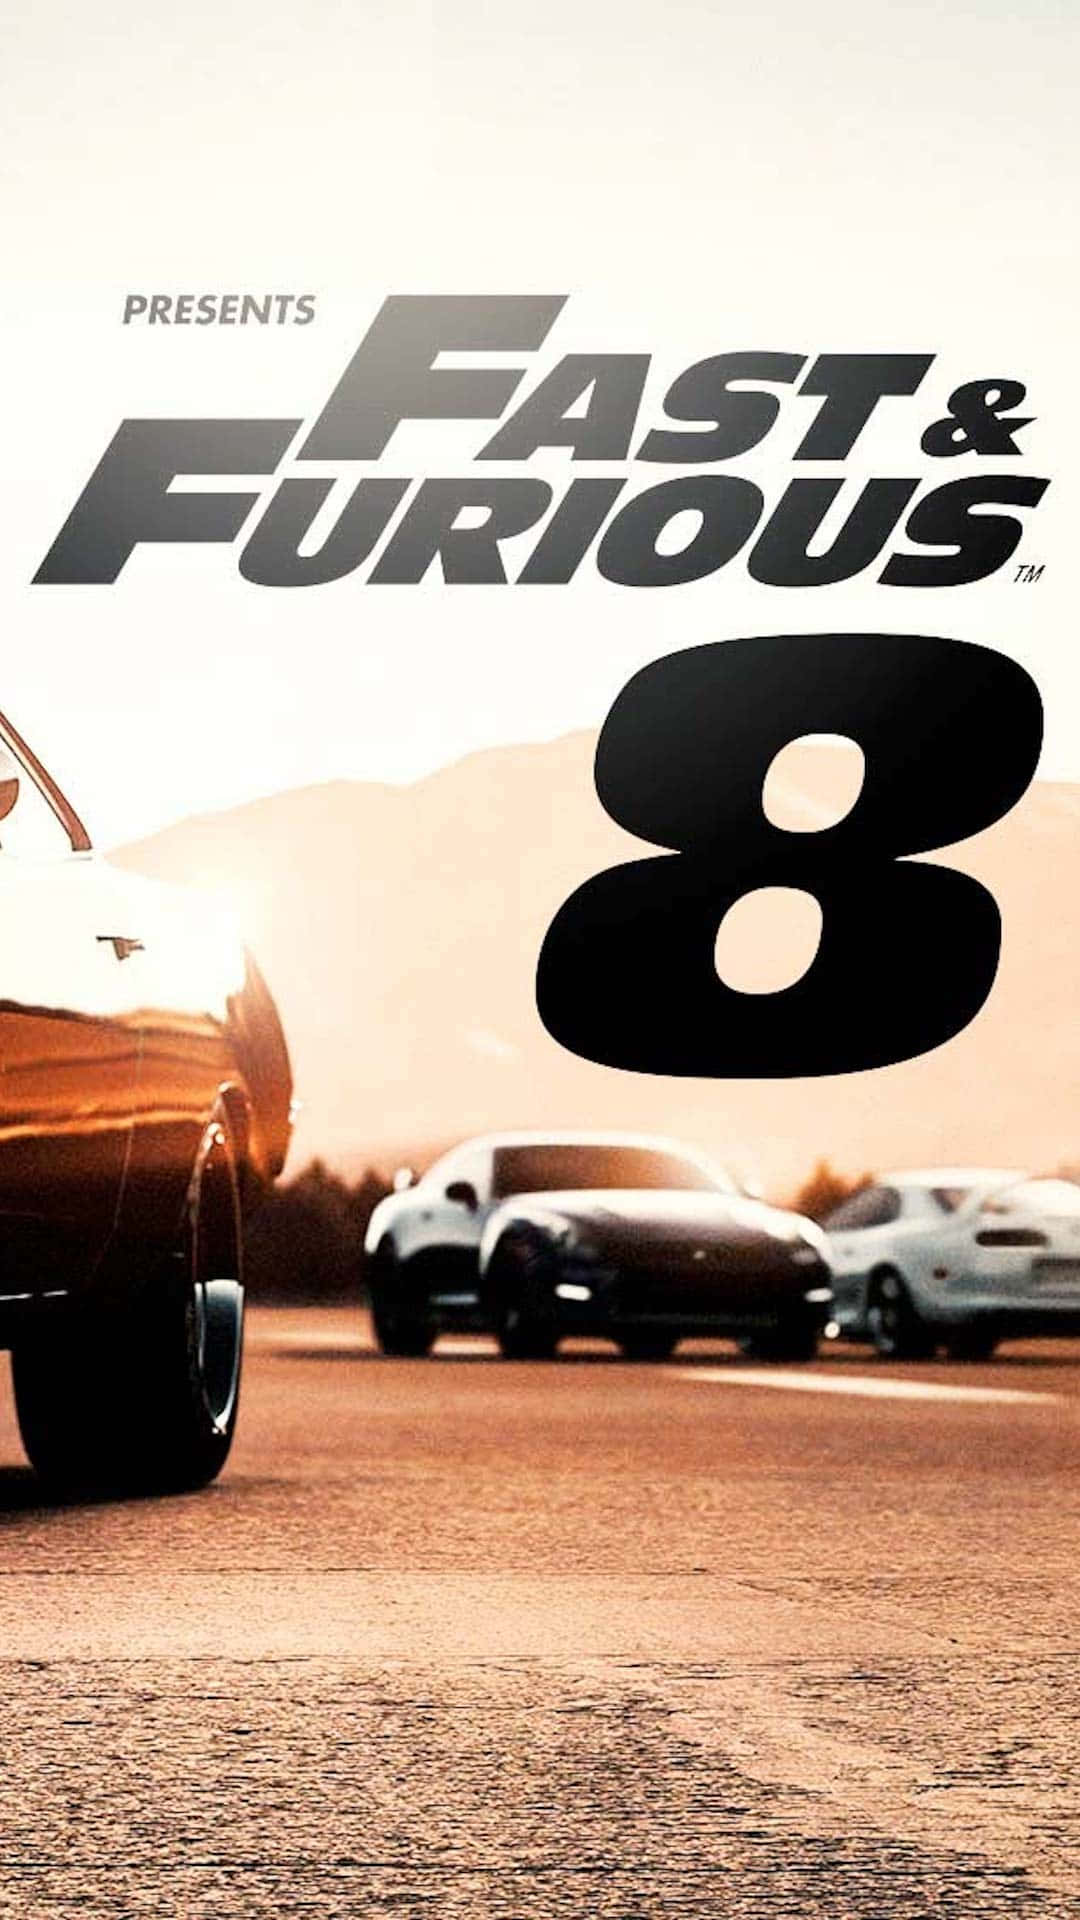 Enjoy the thrill of Fast and Furious on your iPhone Wallpaper